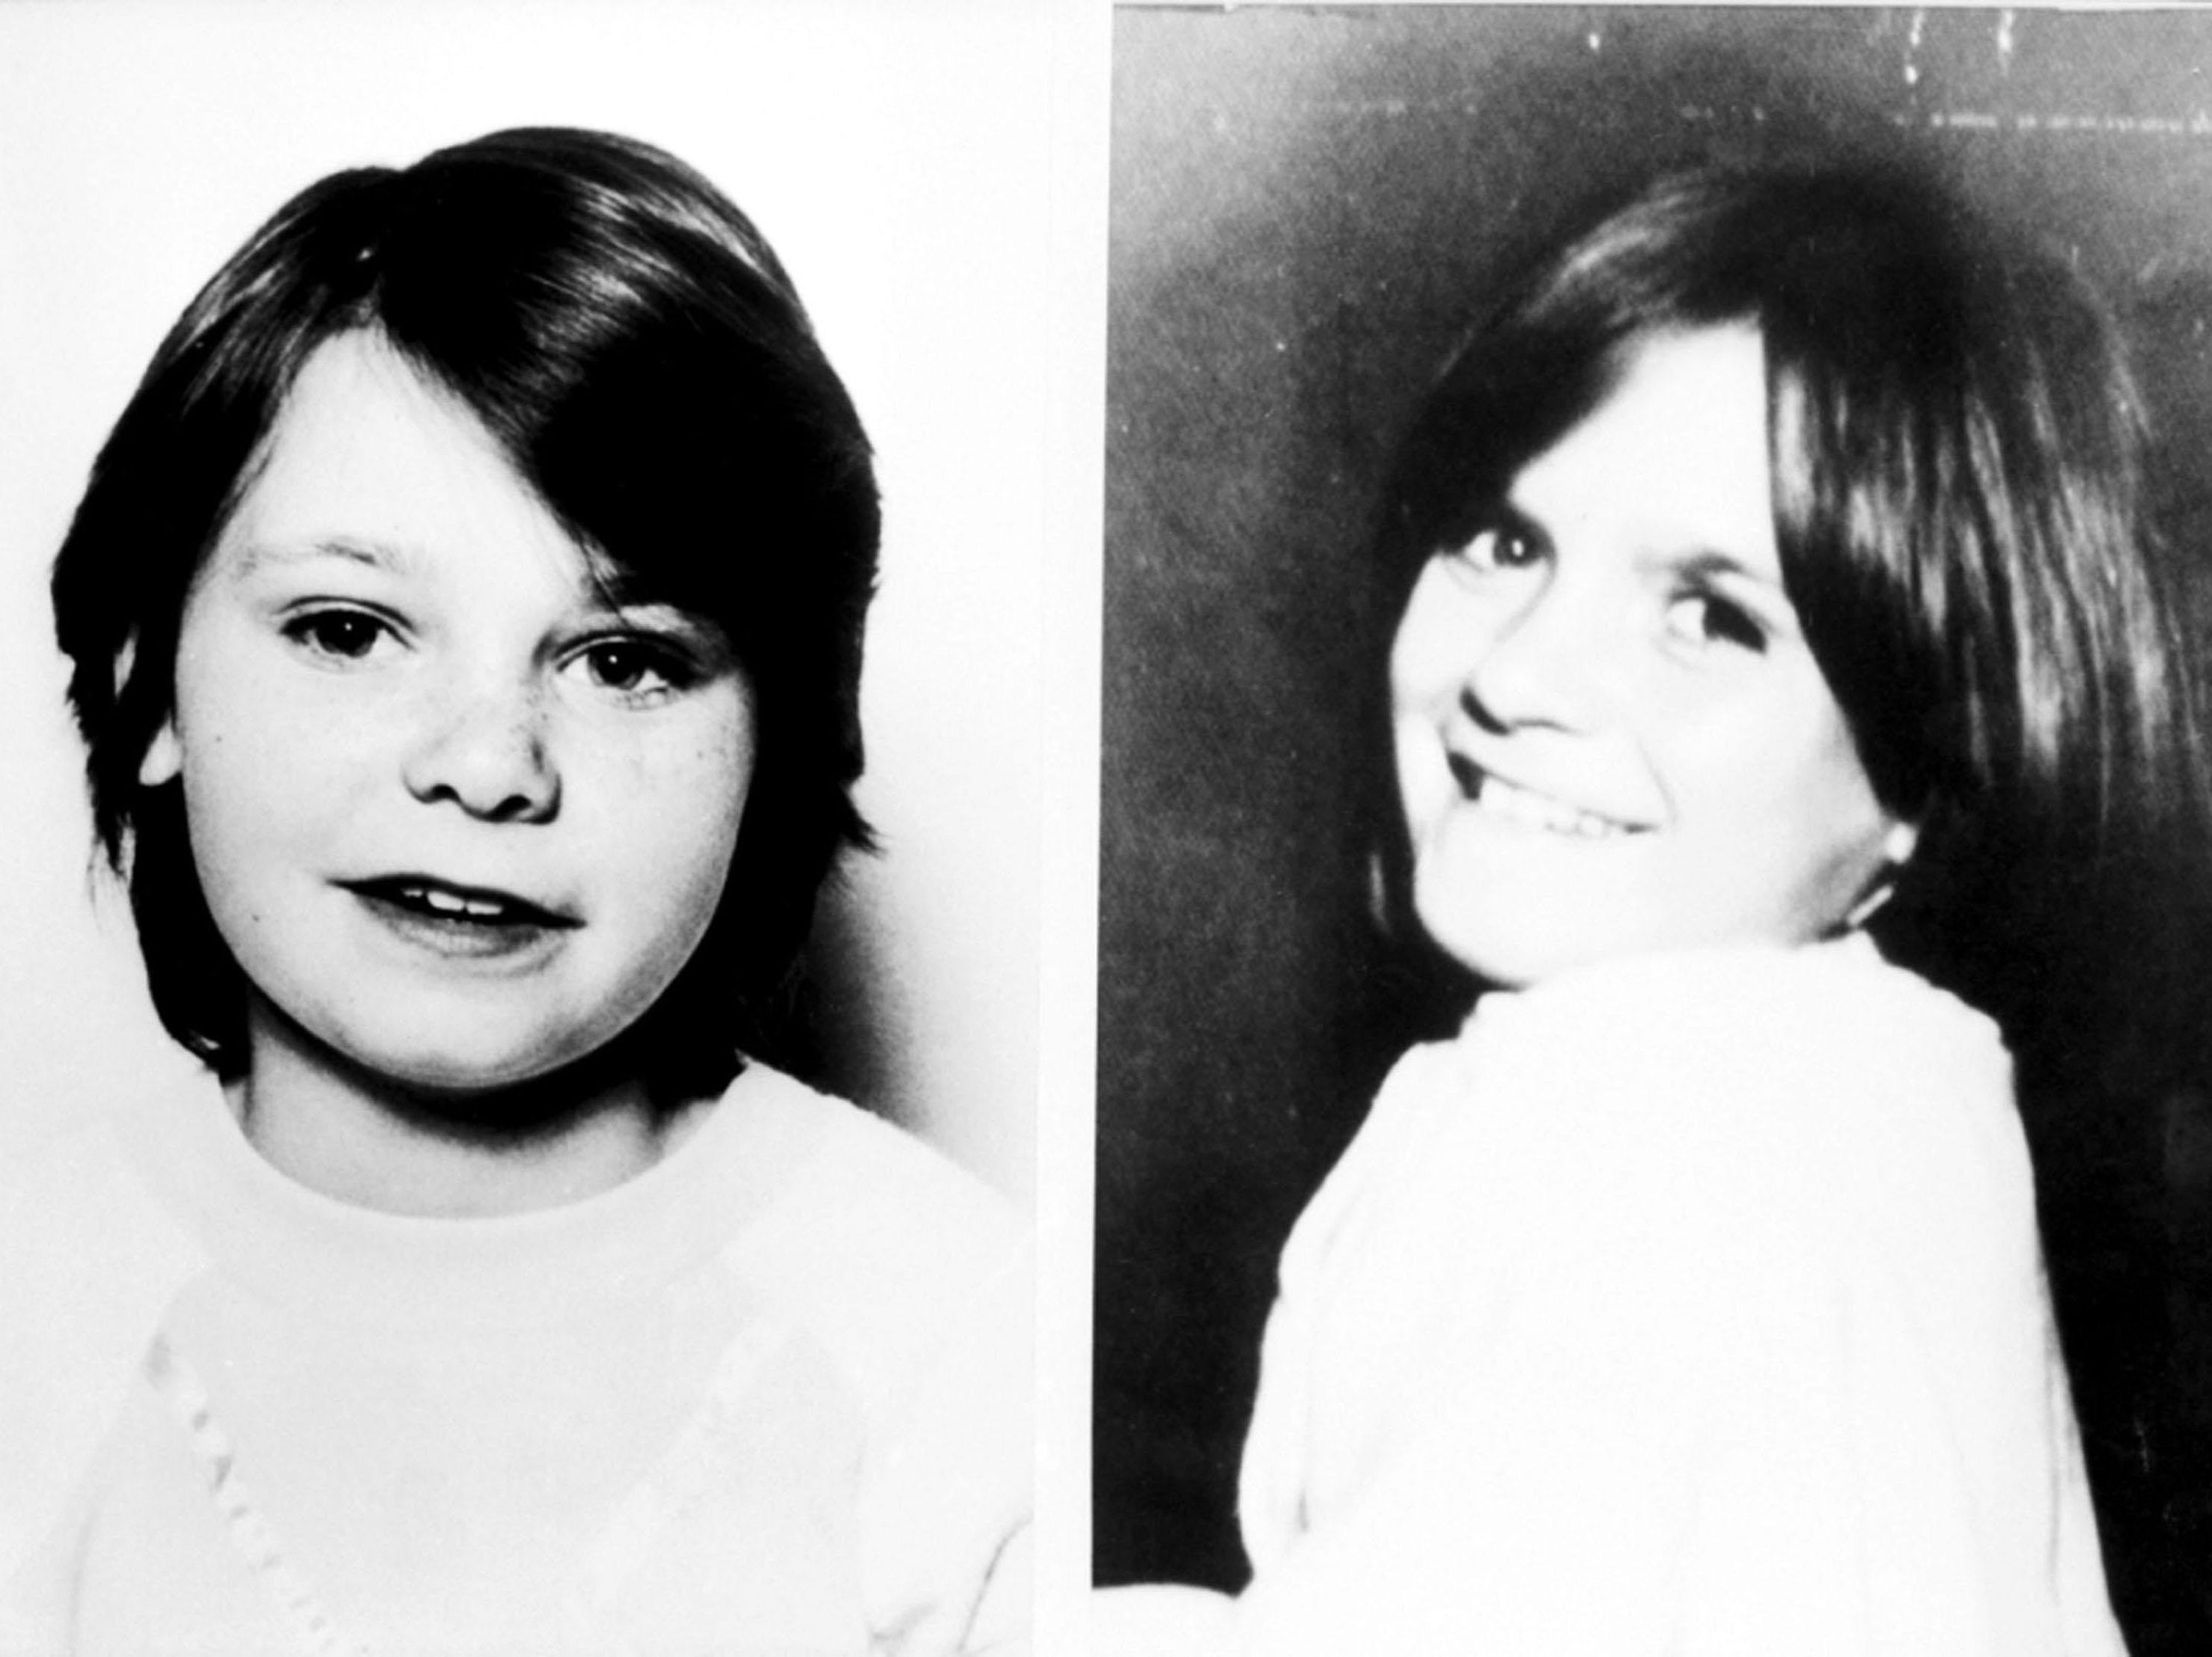 File photos of Karen Hadaway (left) and Nicola Fellows who were found sexually assaulted and strangled in a woodland den in Brighton in October 1986